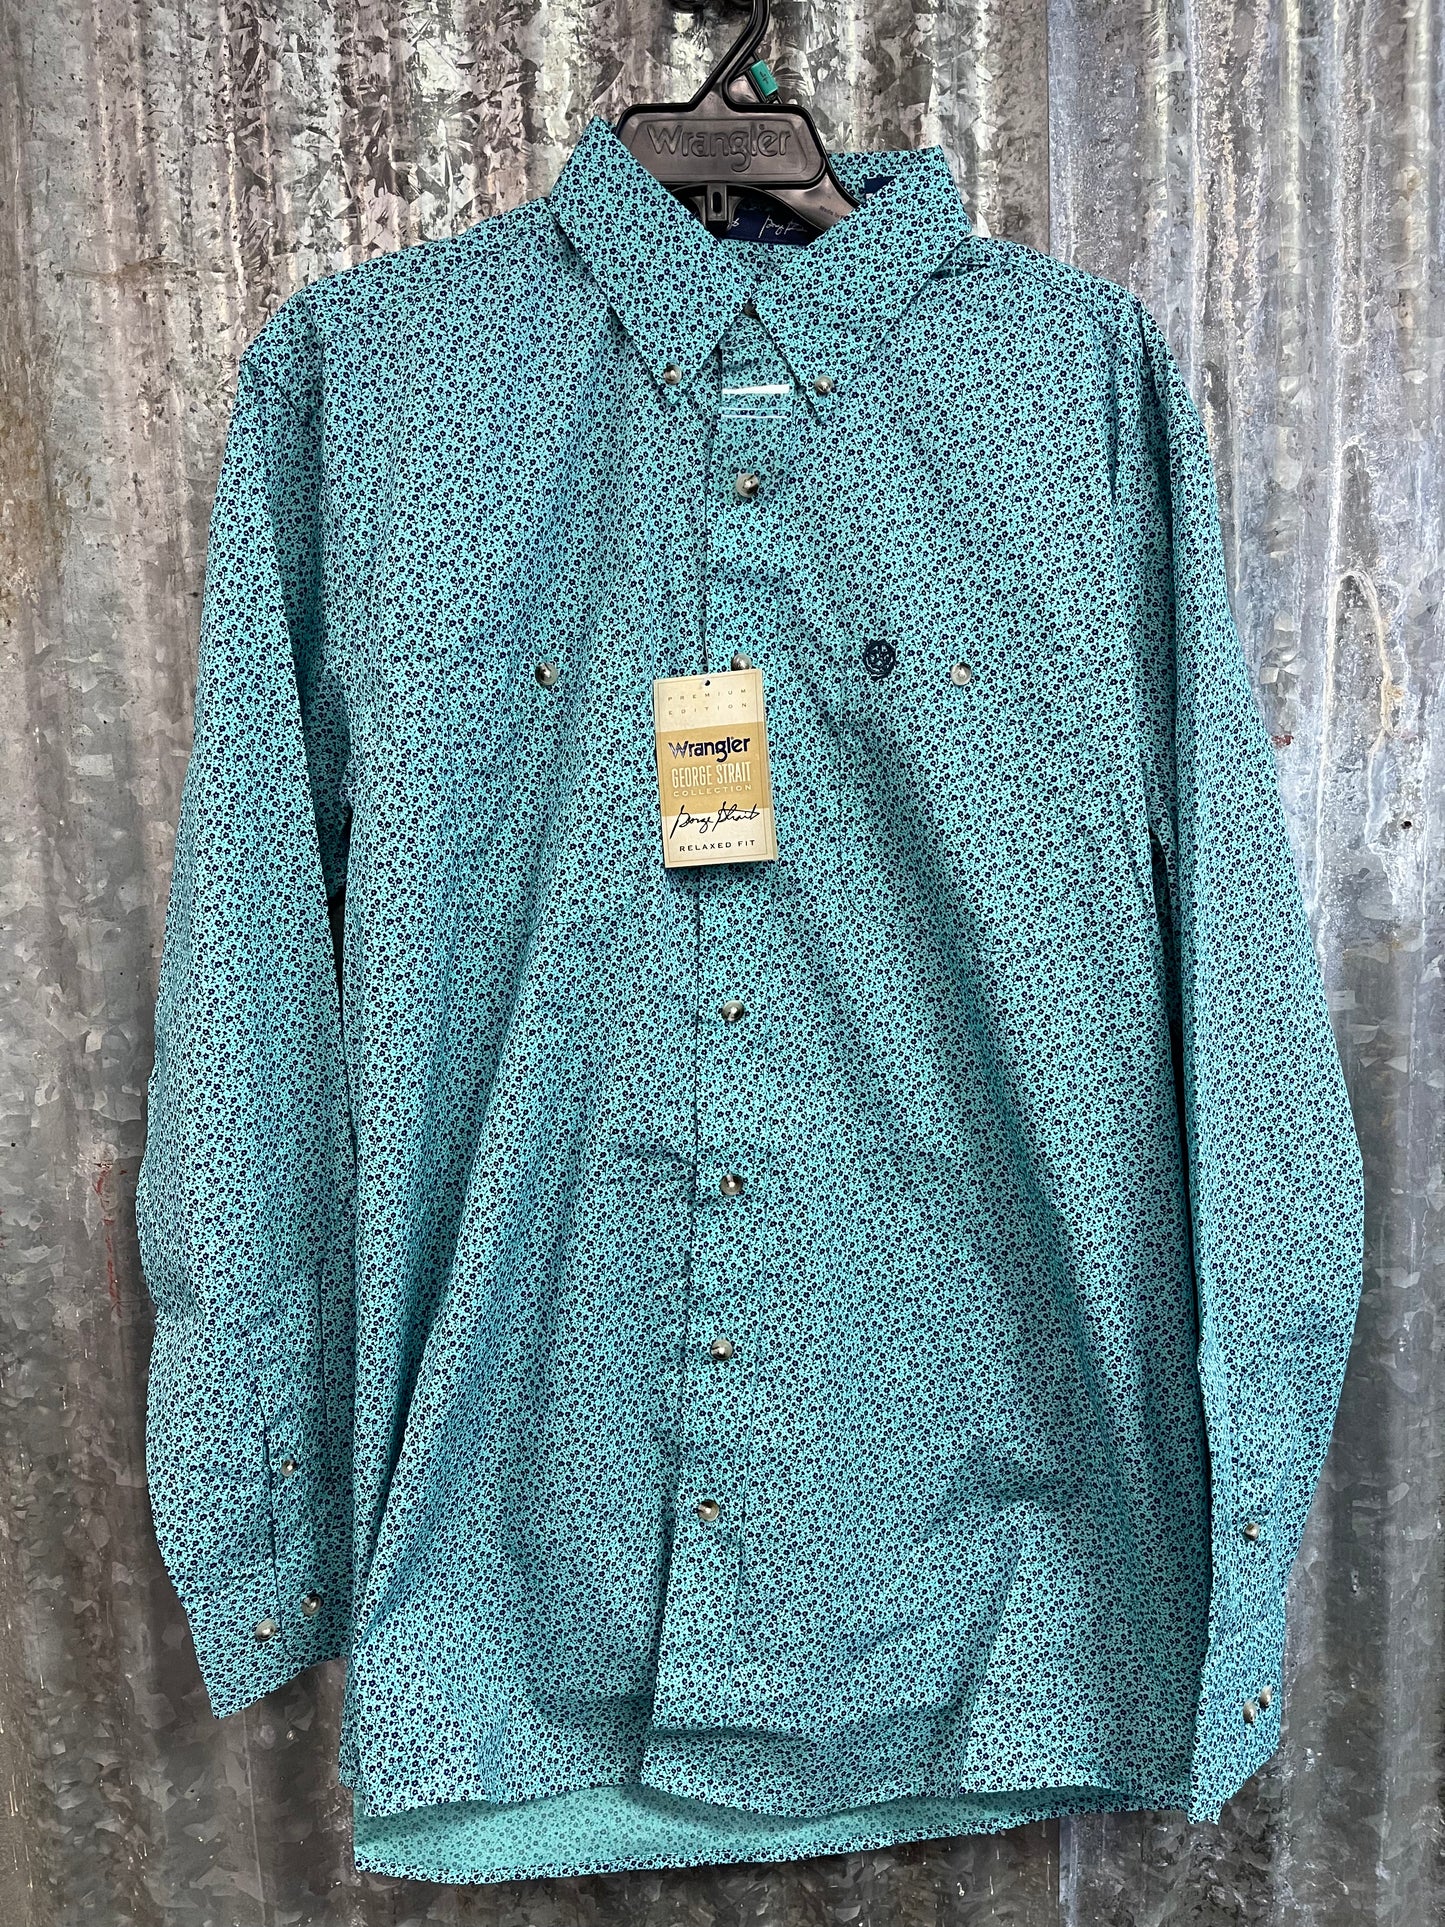 WRANGLER MENS GEORGE STRAIT COLLECTION BUTTONUP IN MINT AND NAVY PRINT